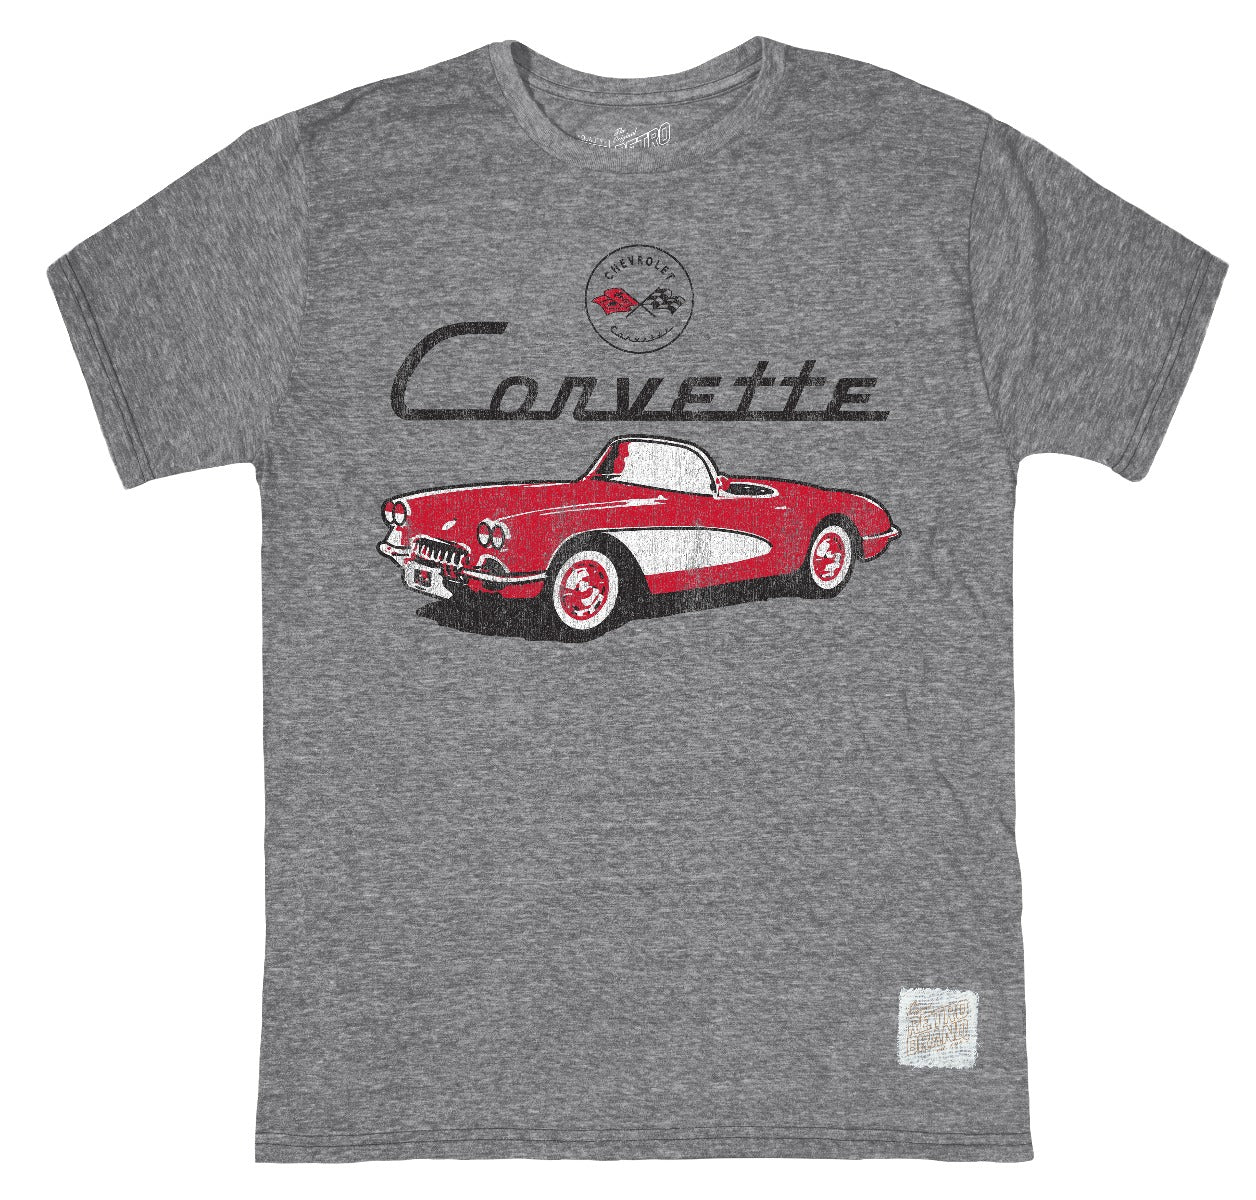 1959 corvette in red and white with chevy emblem and name above on our tri-blend unisex tee in streaky gray